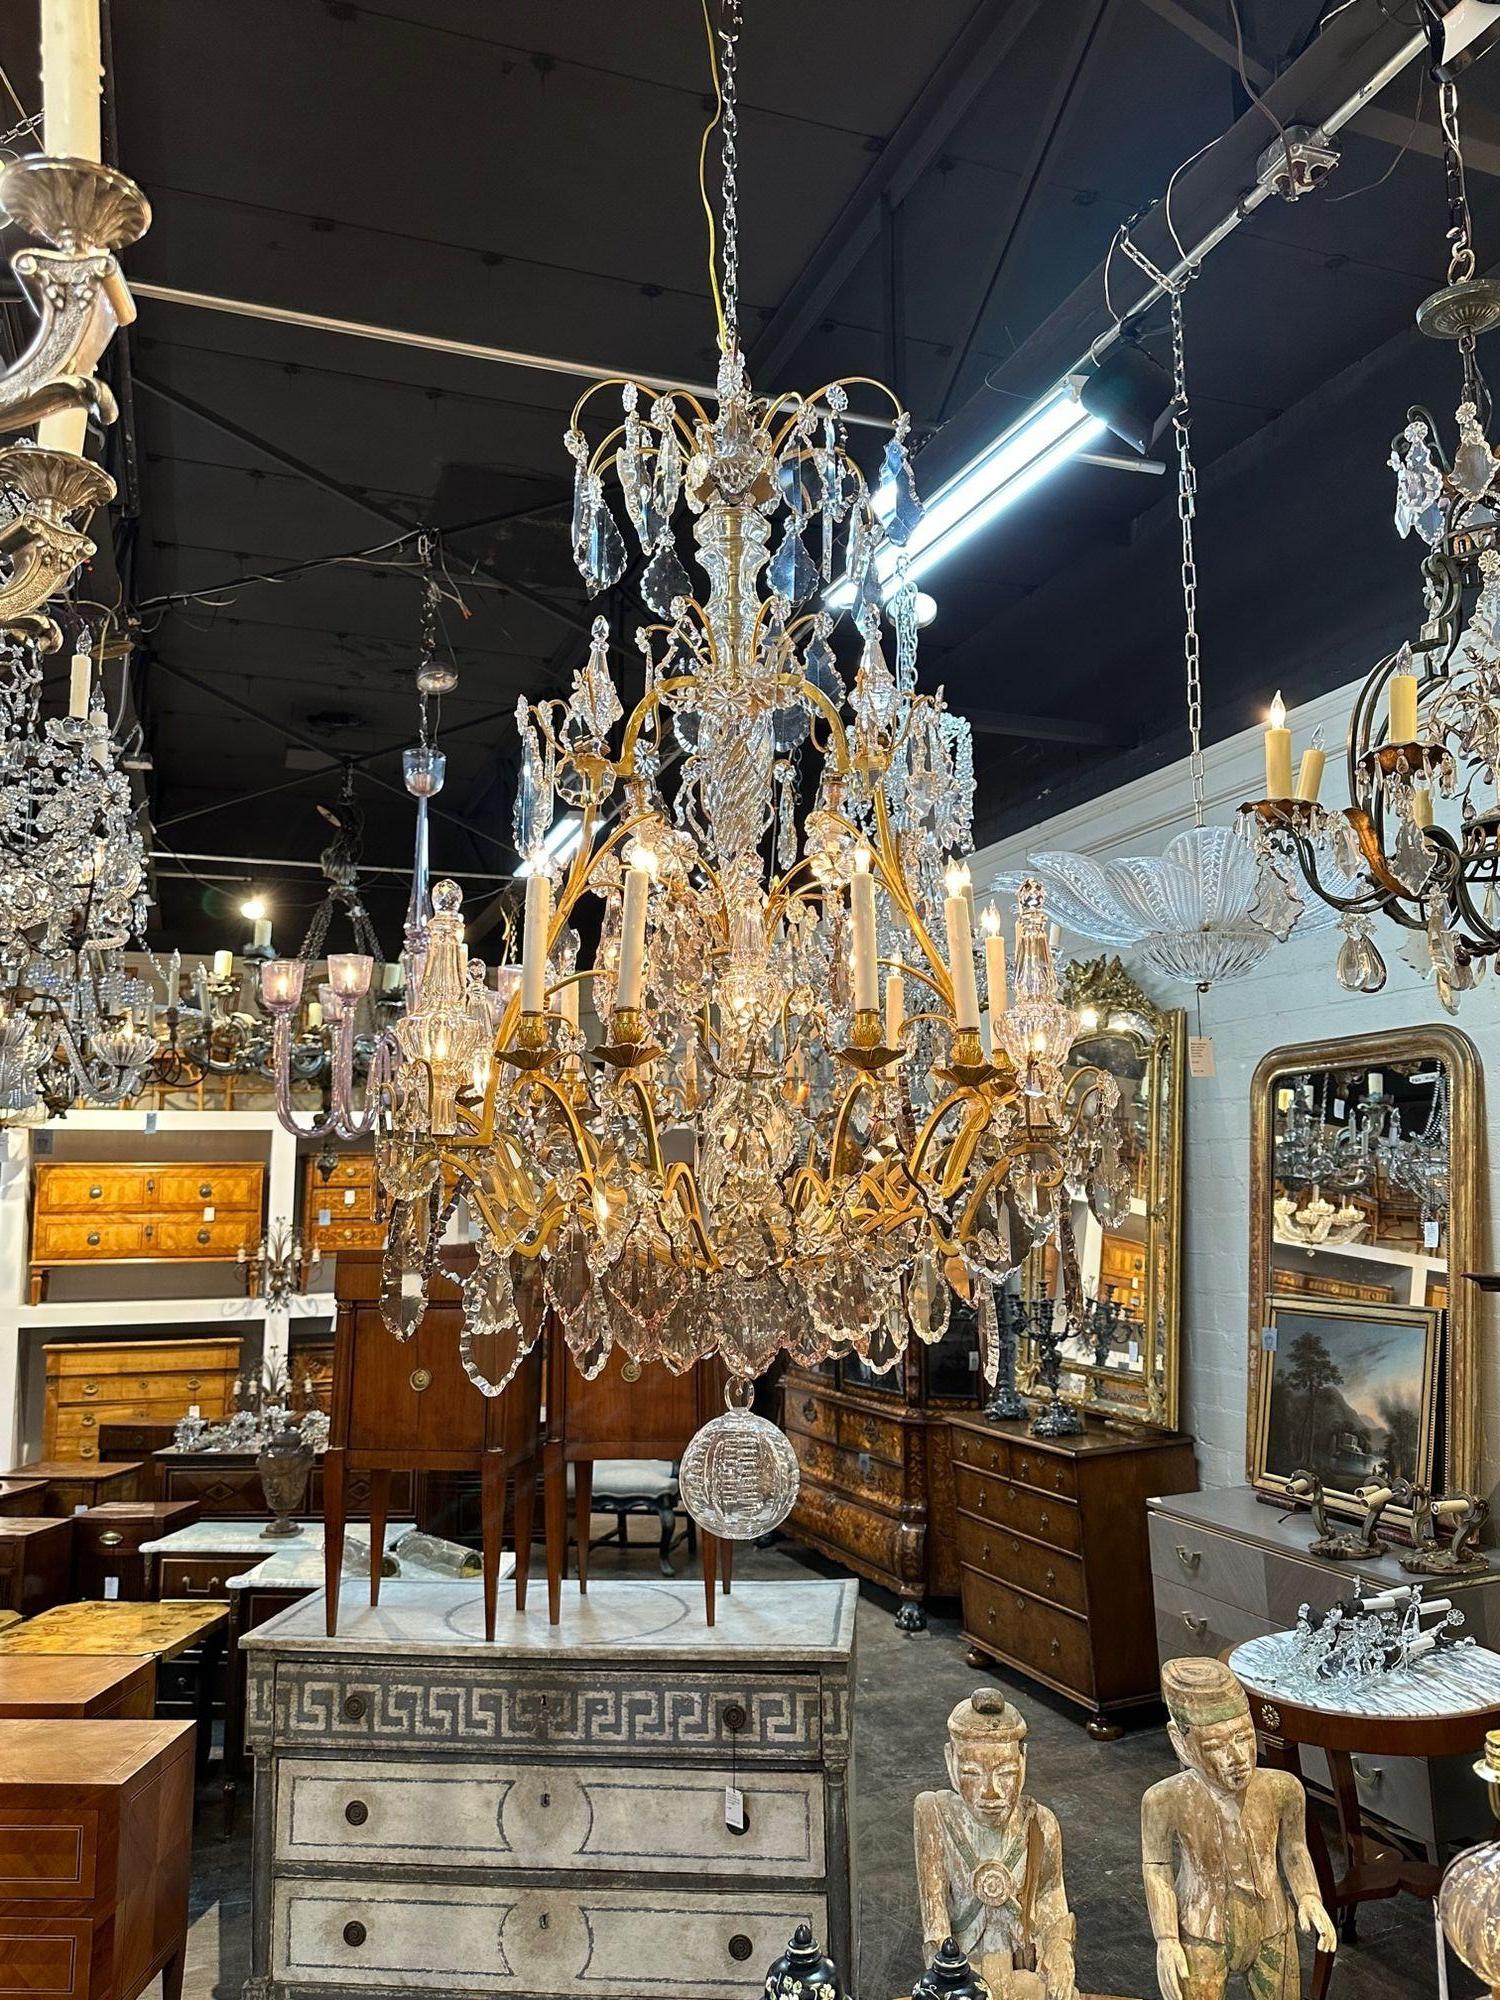 Outstanding 19th century French Baccarat gilt bronze and crystal chandelier. Circa 1870. The chandelier has been professionally rewired, comes with matching chain and canopy. It is ready to hang!